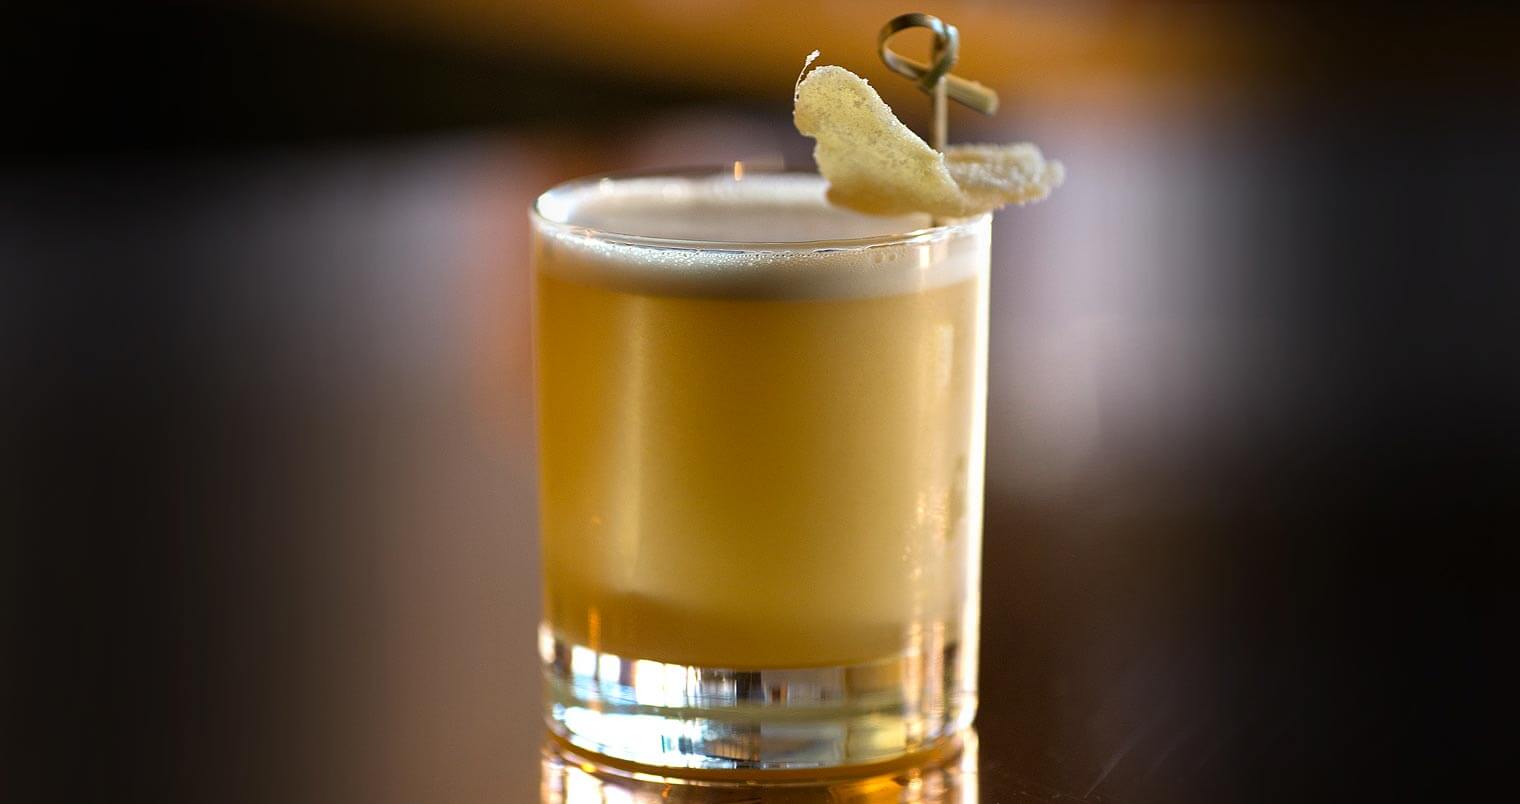 Celebrate National Scotch Day with a Dewar's Penicillin Cocktail, featured image